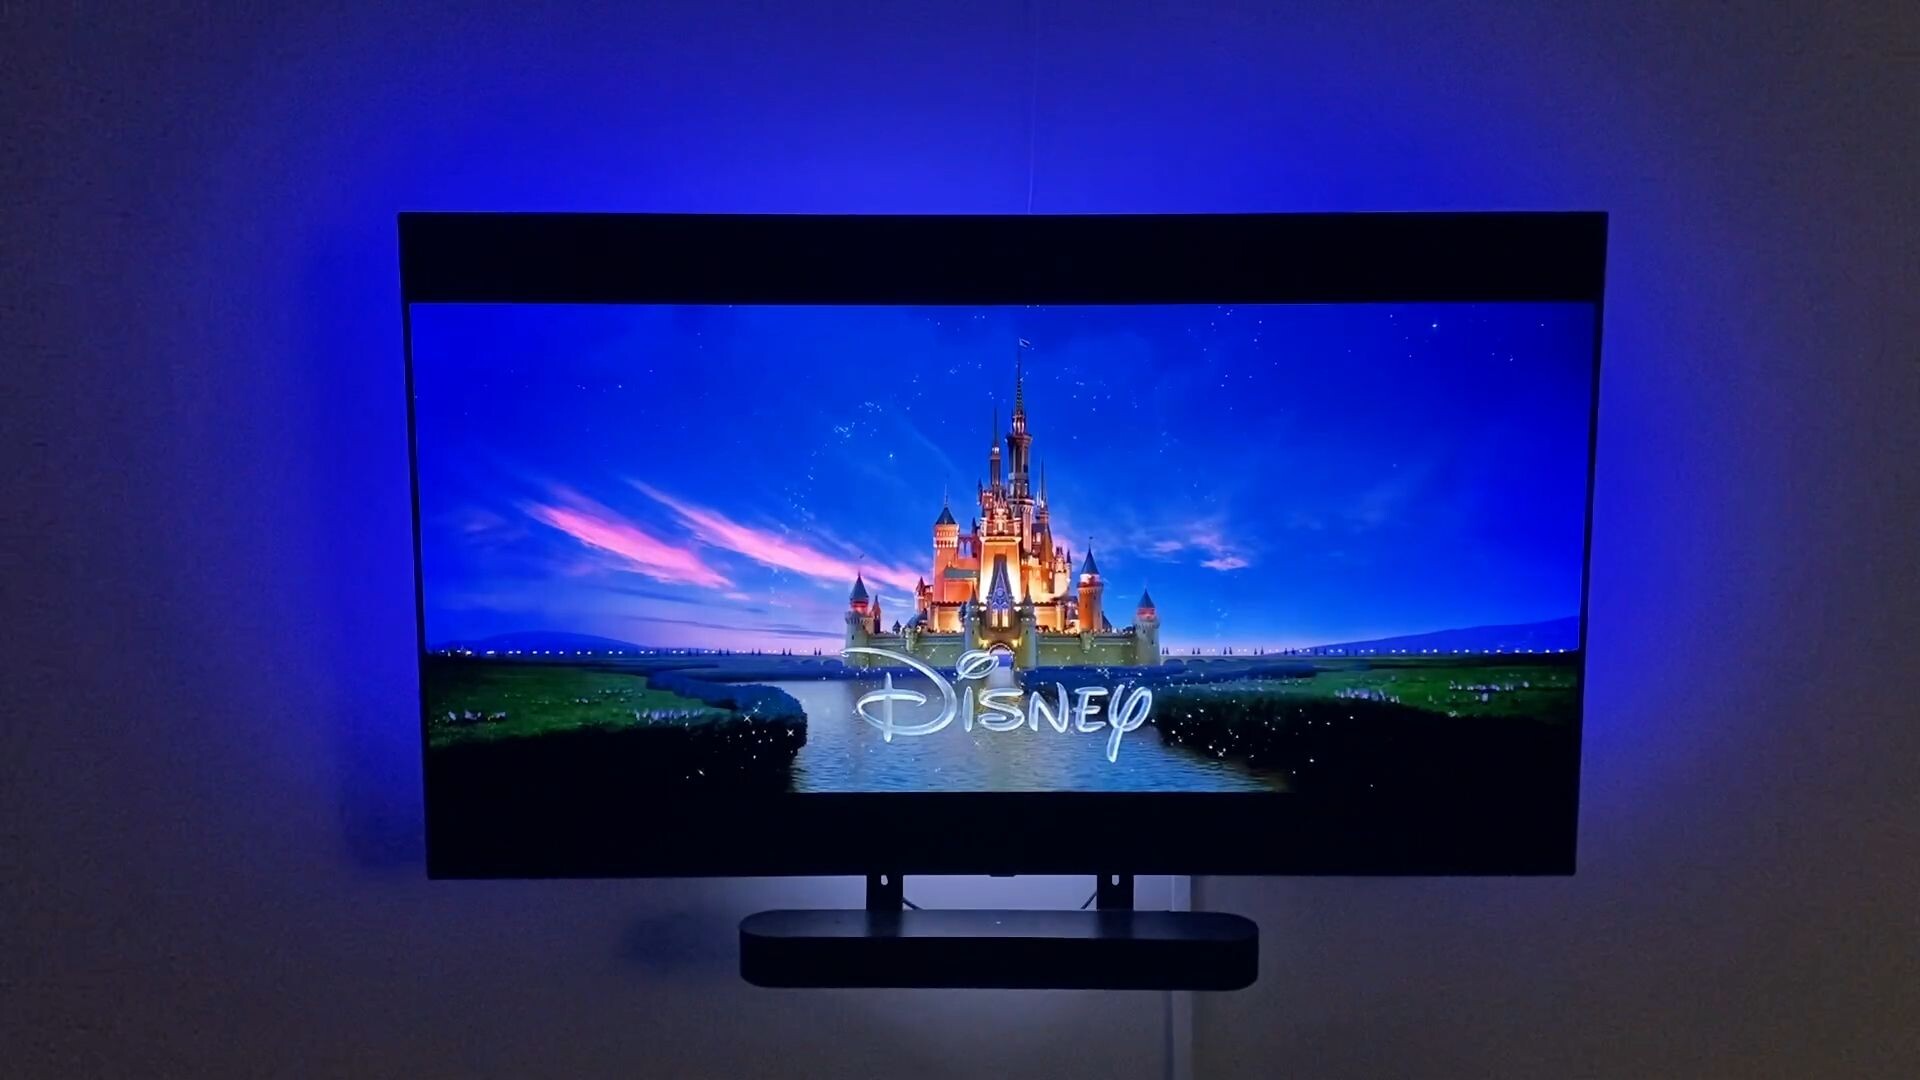 Another TV Ambilight Project - Projects - WLED